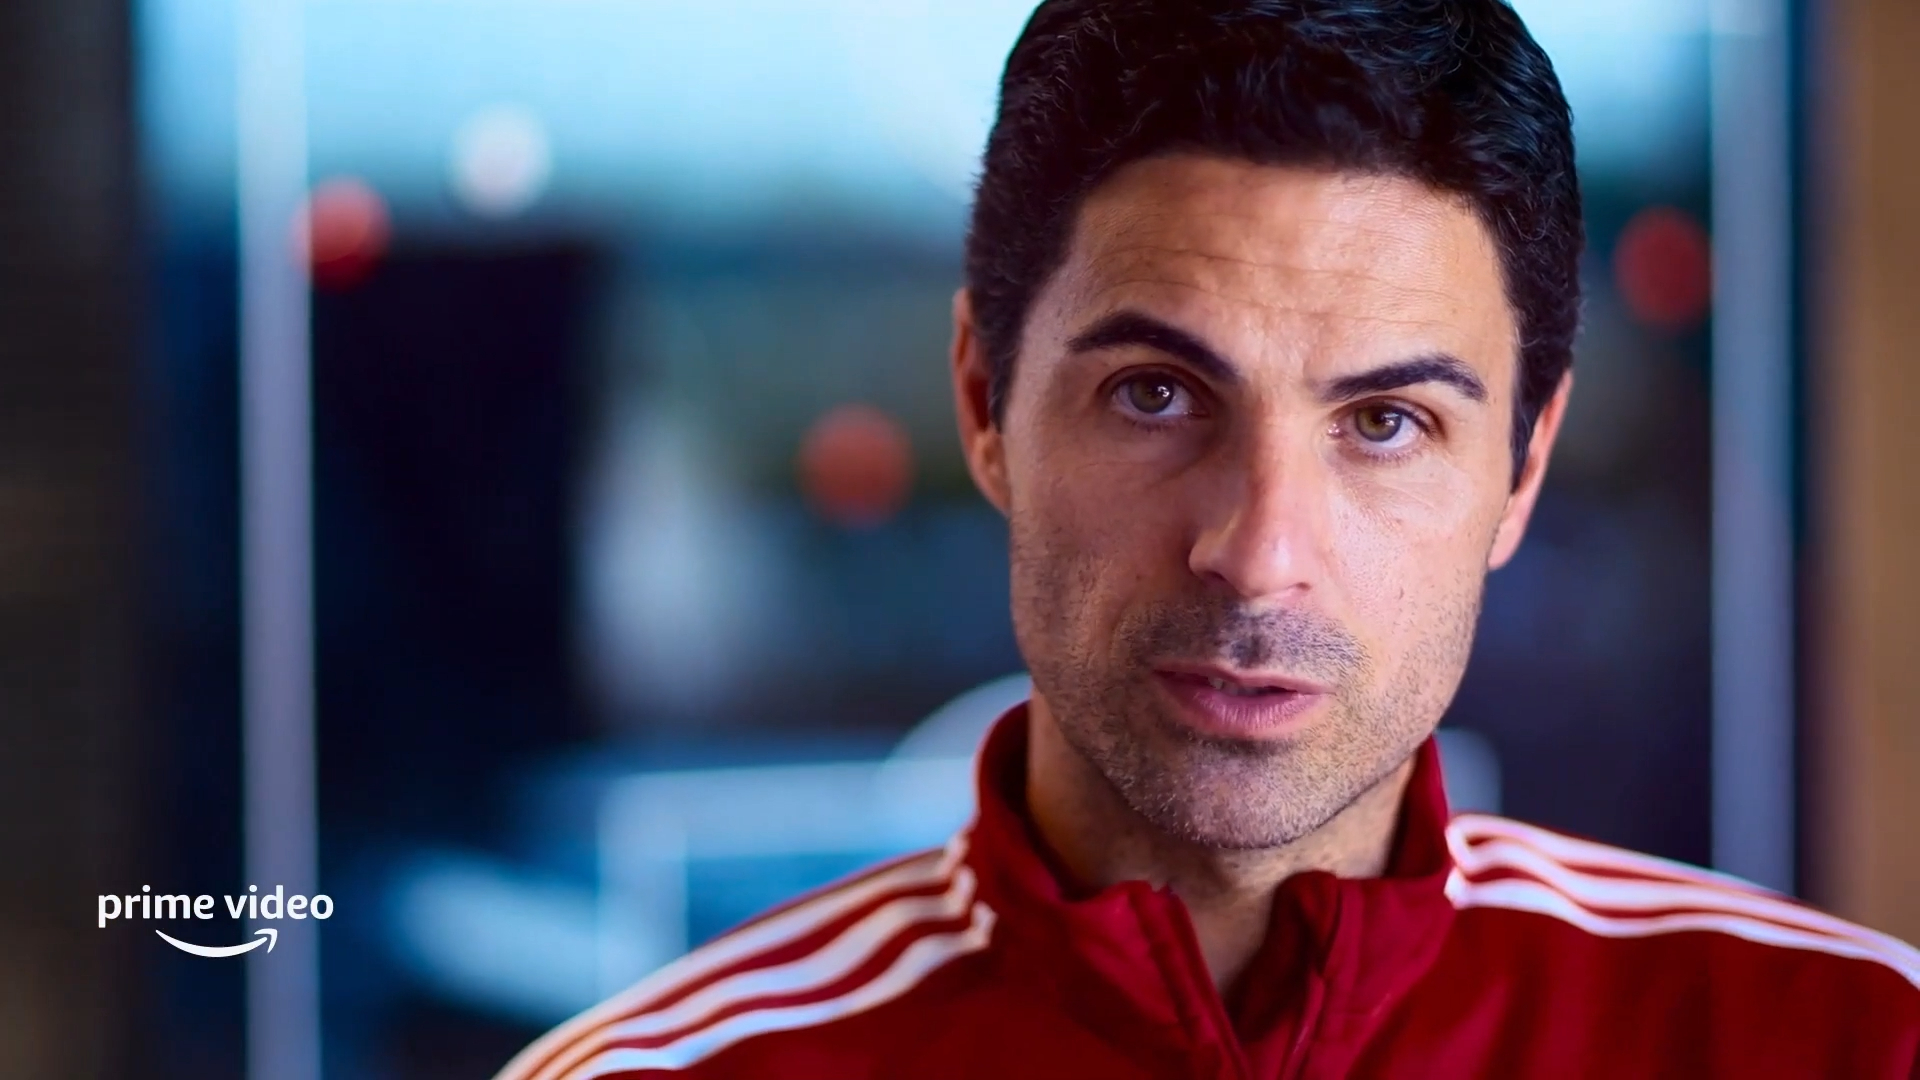 Mikel Arteta, ex-soccer player and Spanish coach, coach of Arsenal FC (Prime Video)